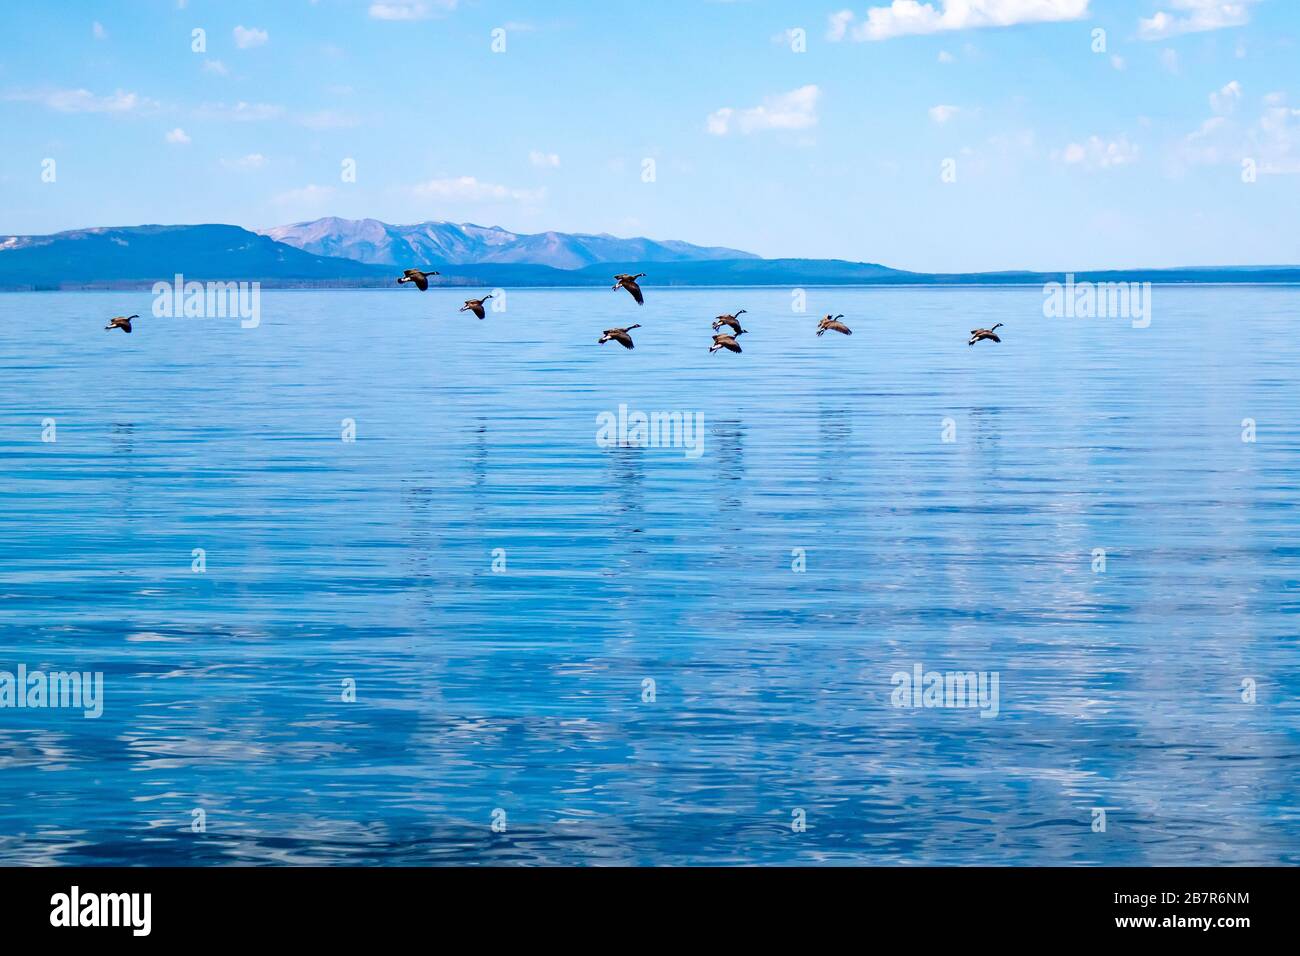 Wild geese (branta canadensis) coming in for a landing onYellowstone lake during the summer with copy space Stock Photo